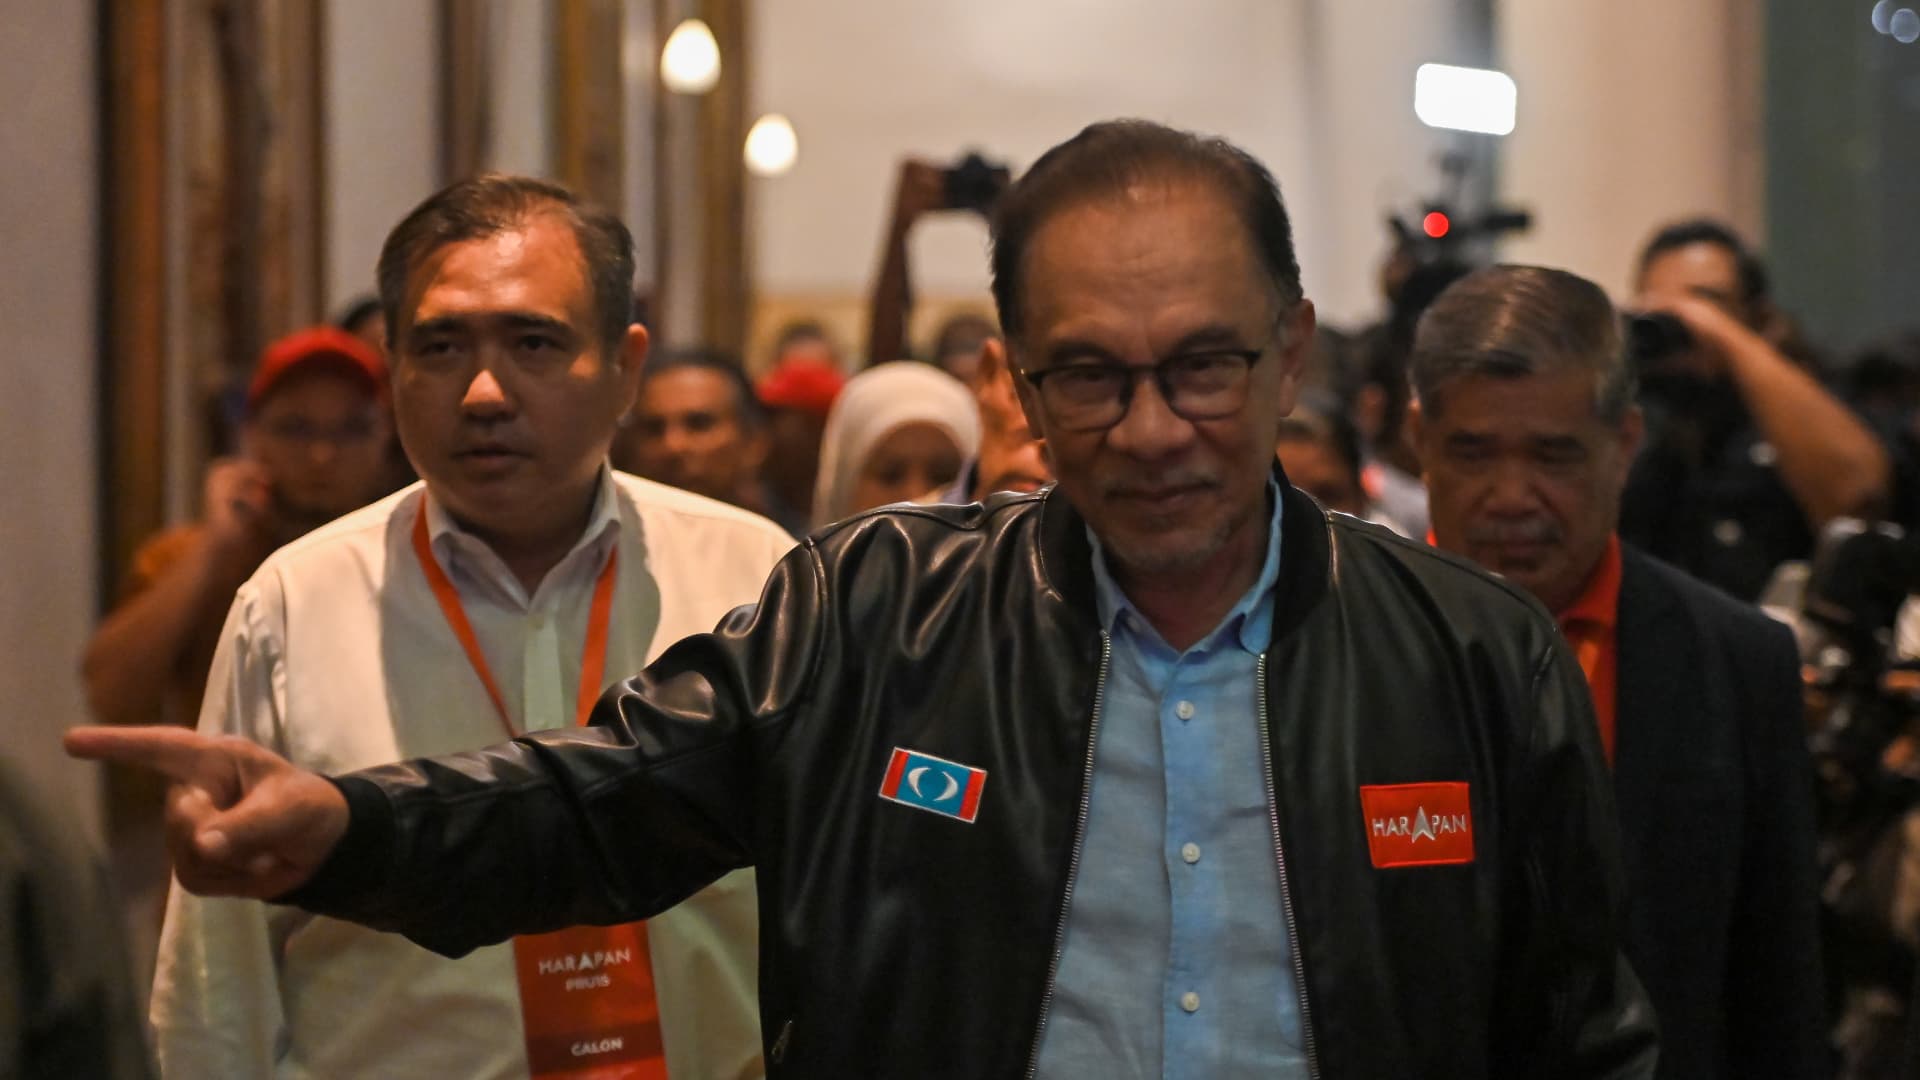 Malaysian voters erred on the side of conservatism at weekend polls, analysts said